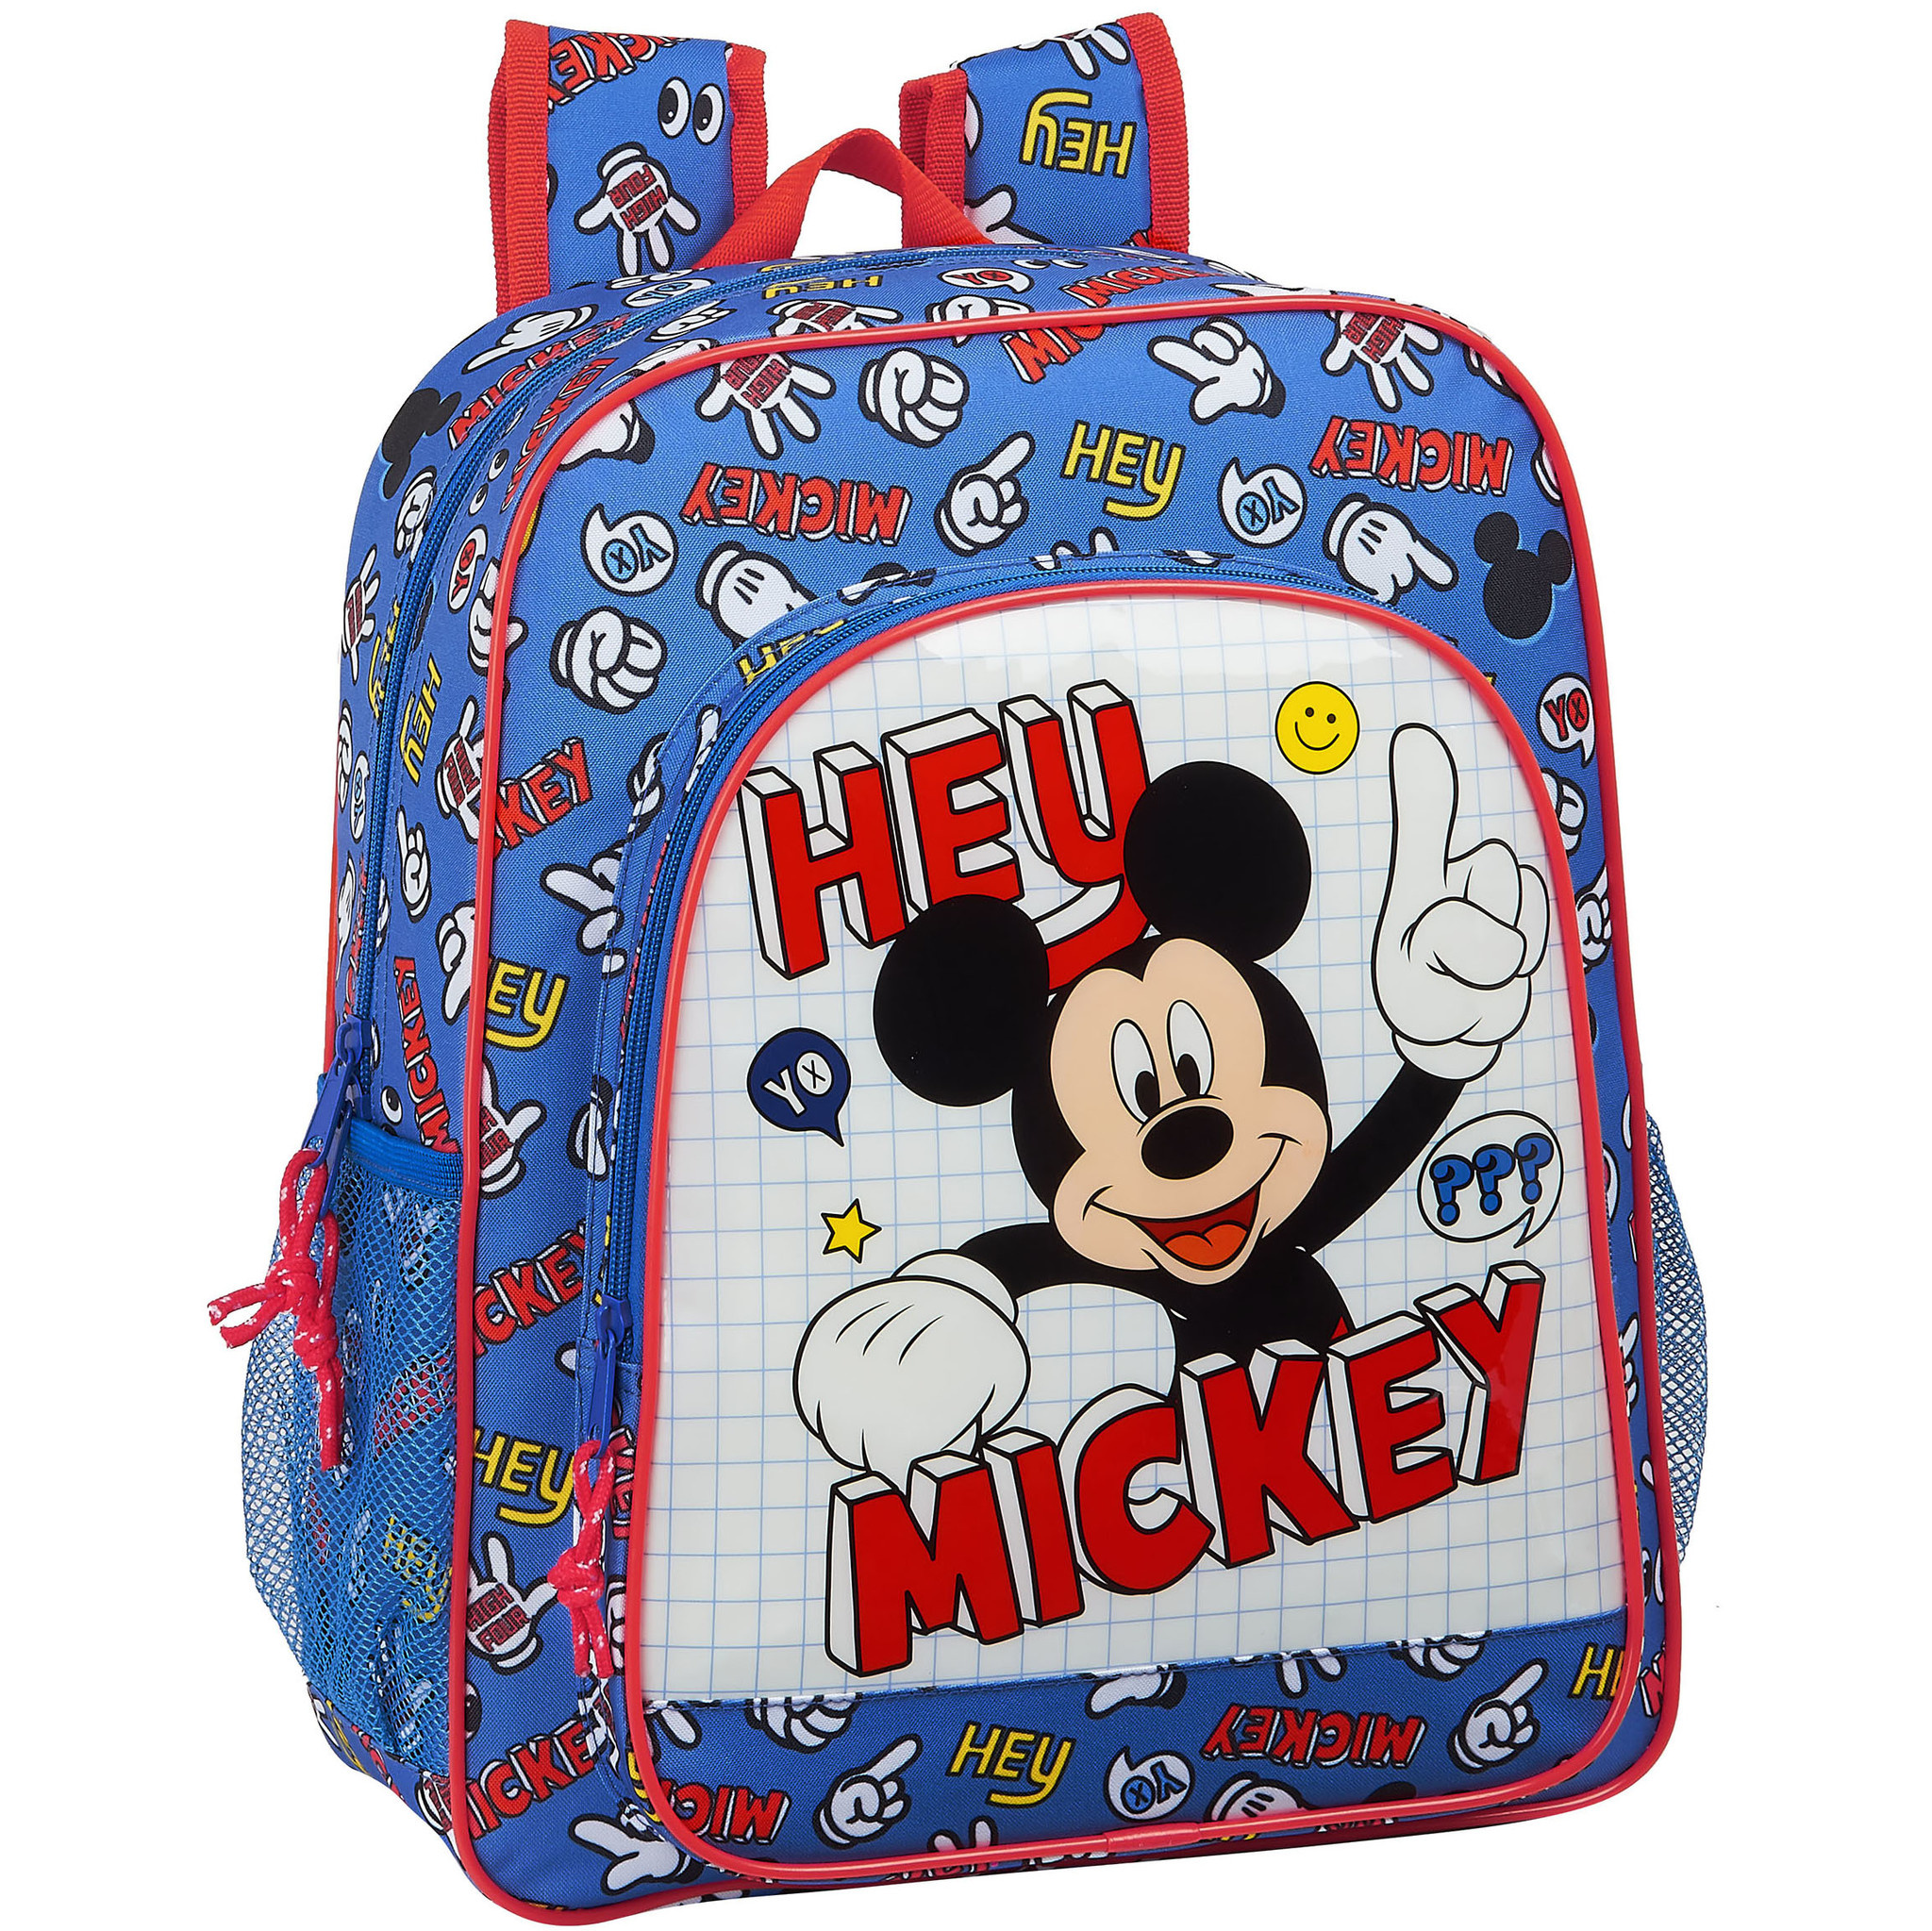 Disney Mickey Mouse Things - Backpack - 32 x 38 x 12 cm - Multi